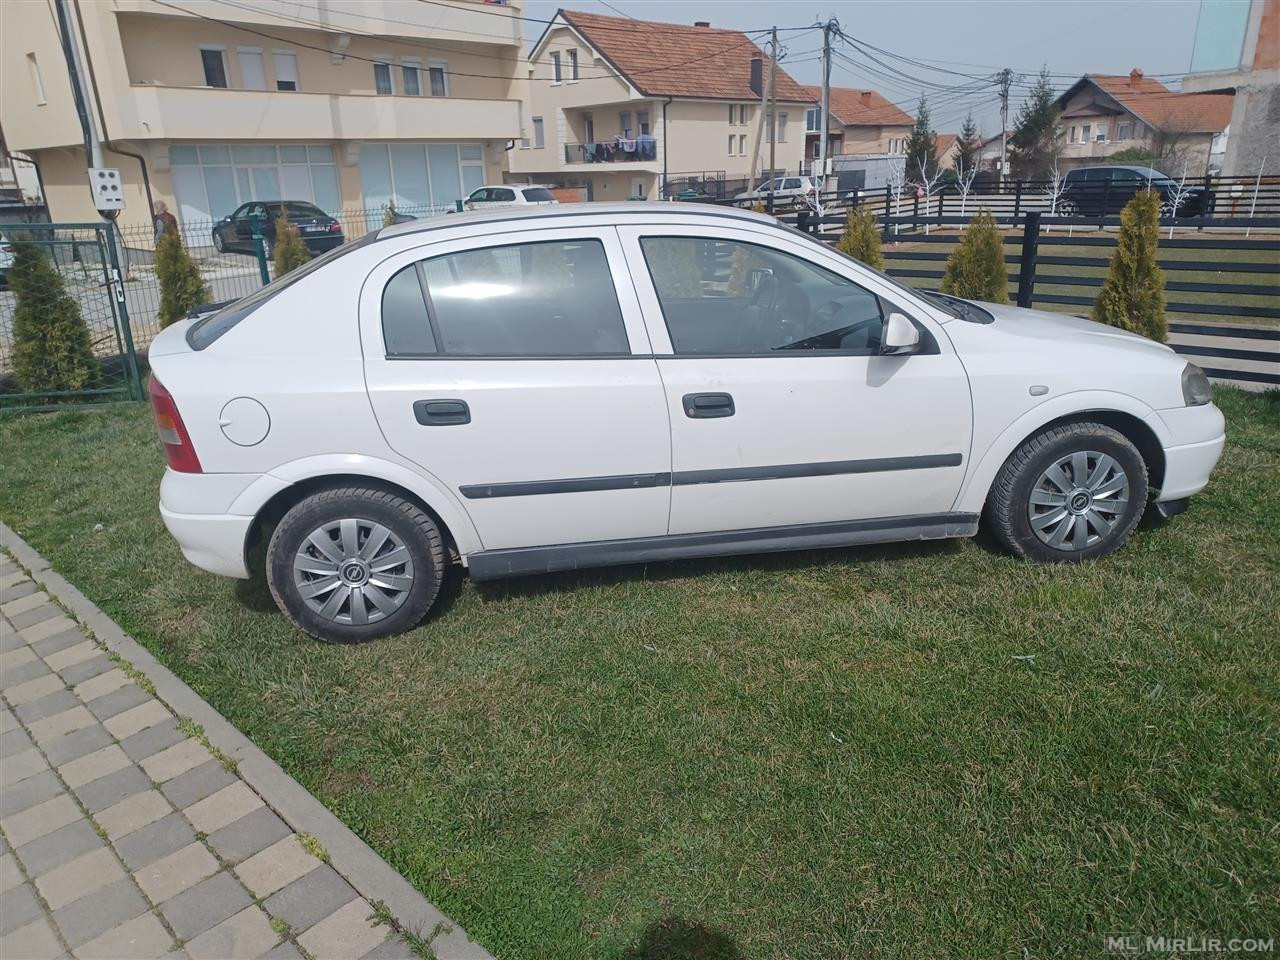 Shes opel astra 1.7 Disell 